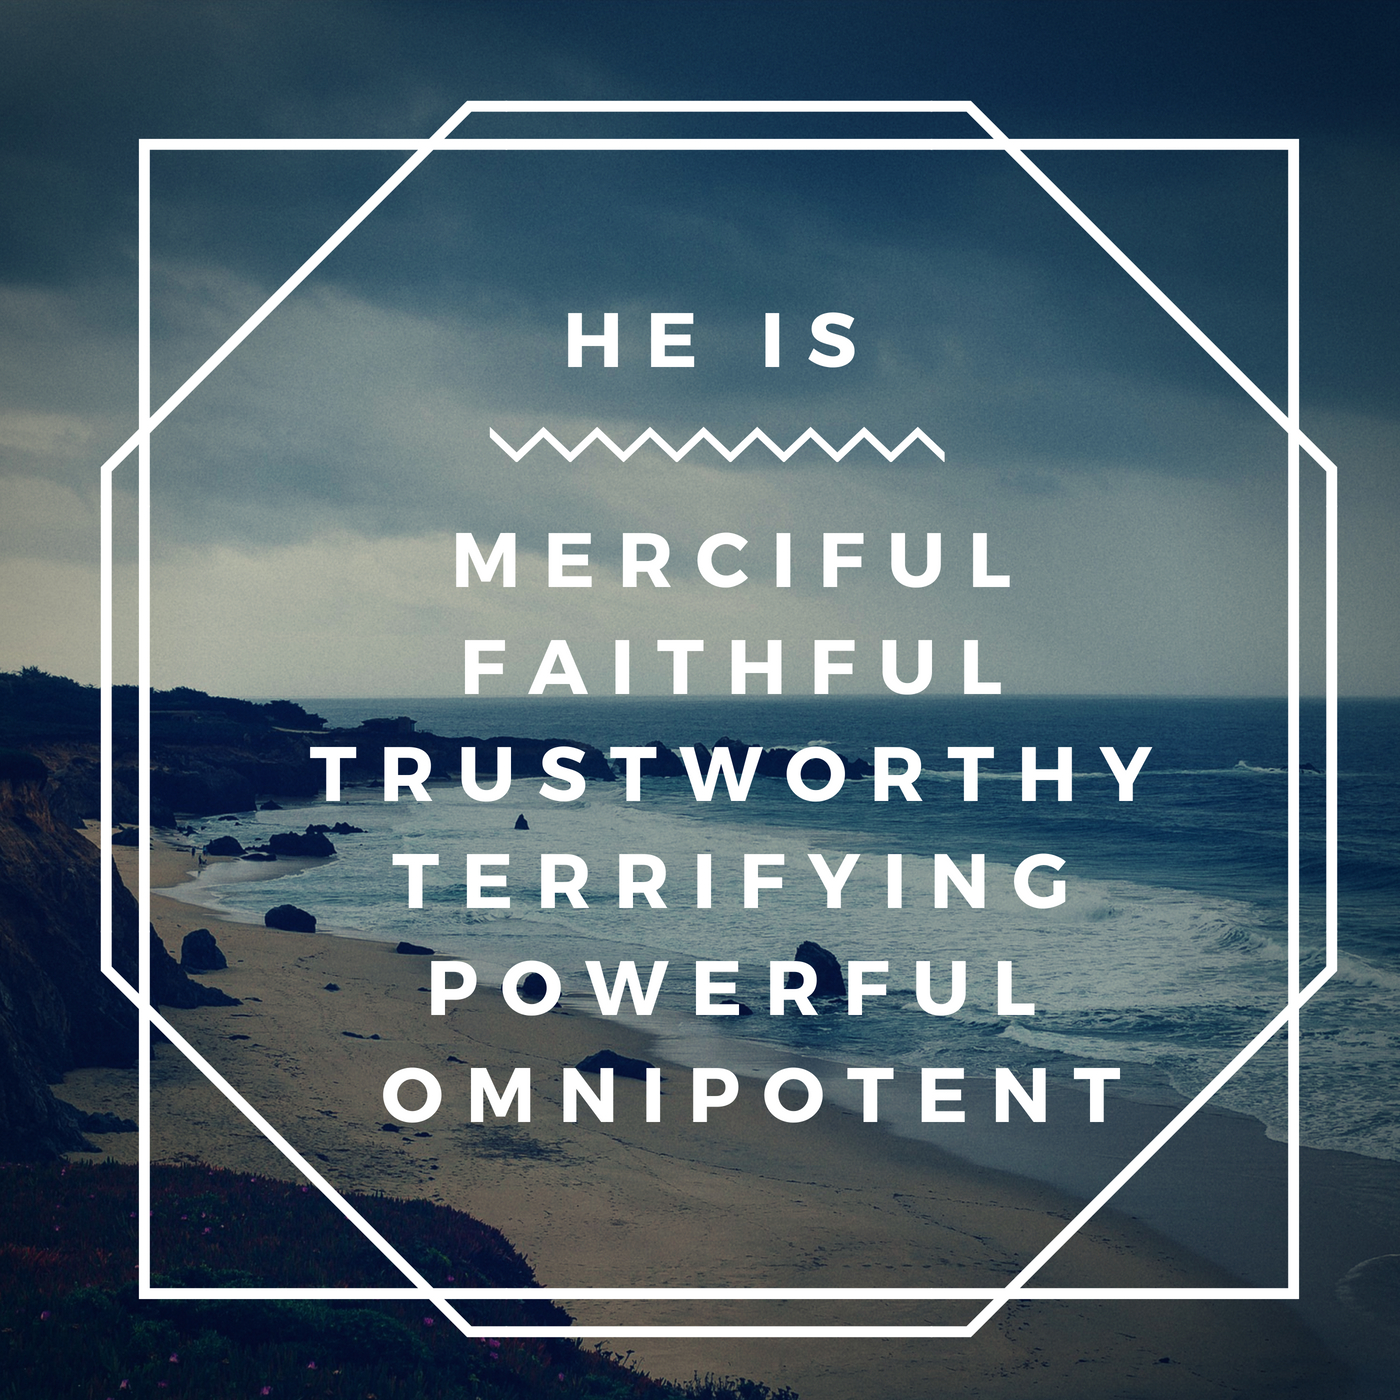 merciful, faithful, and trustworthy, as well as terrifying, powerful, and omnipotent.